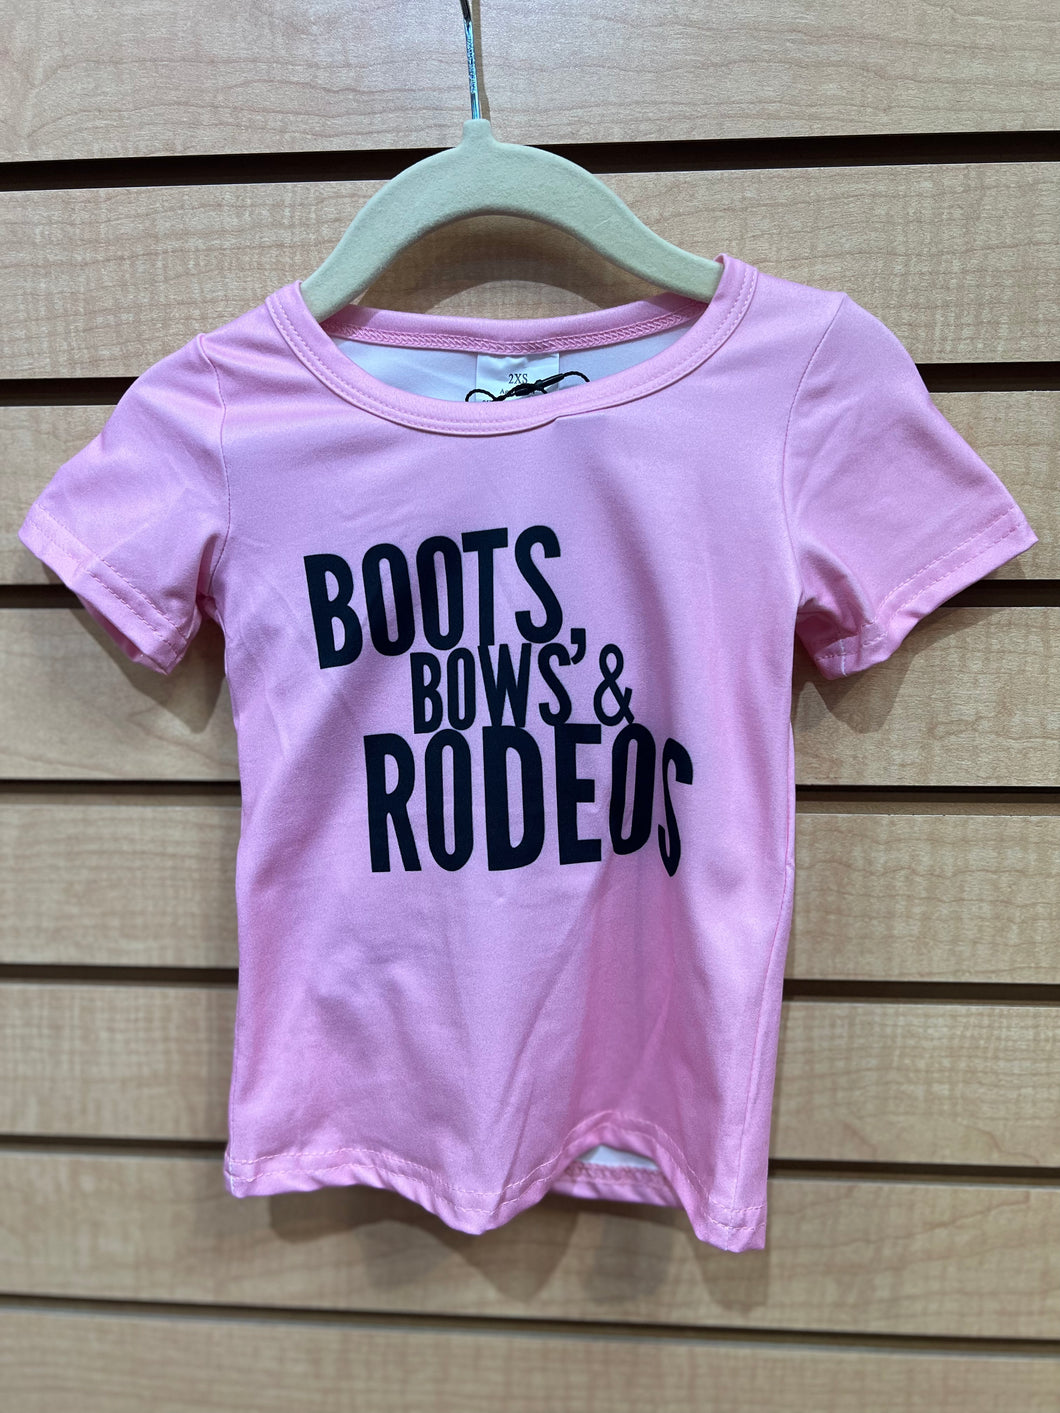 Boots, Bows, & Rodeos